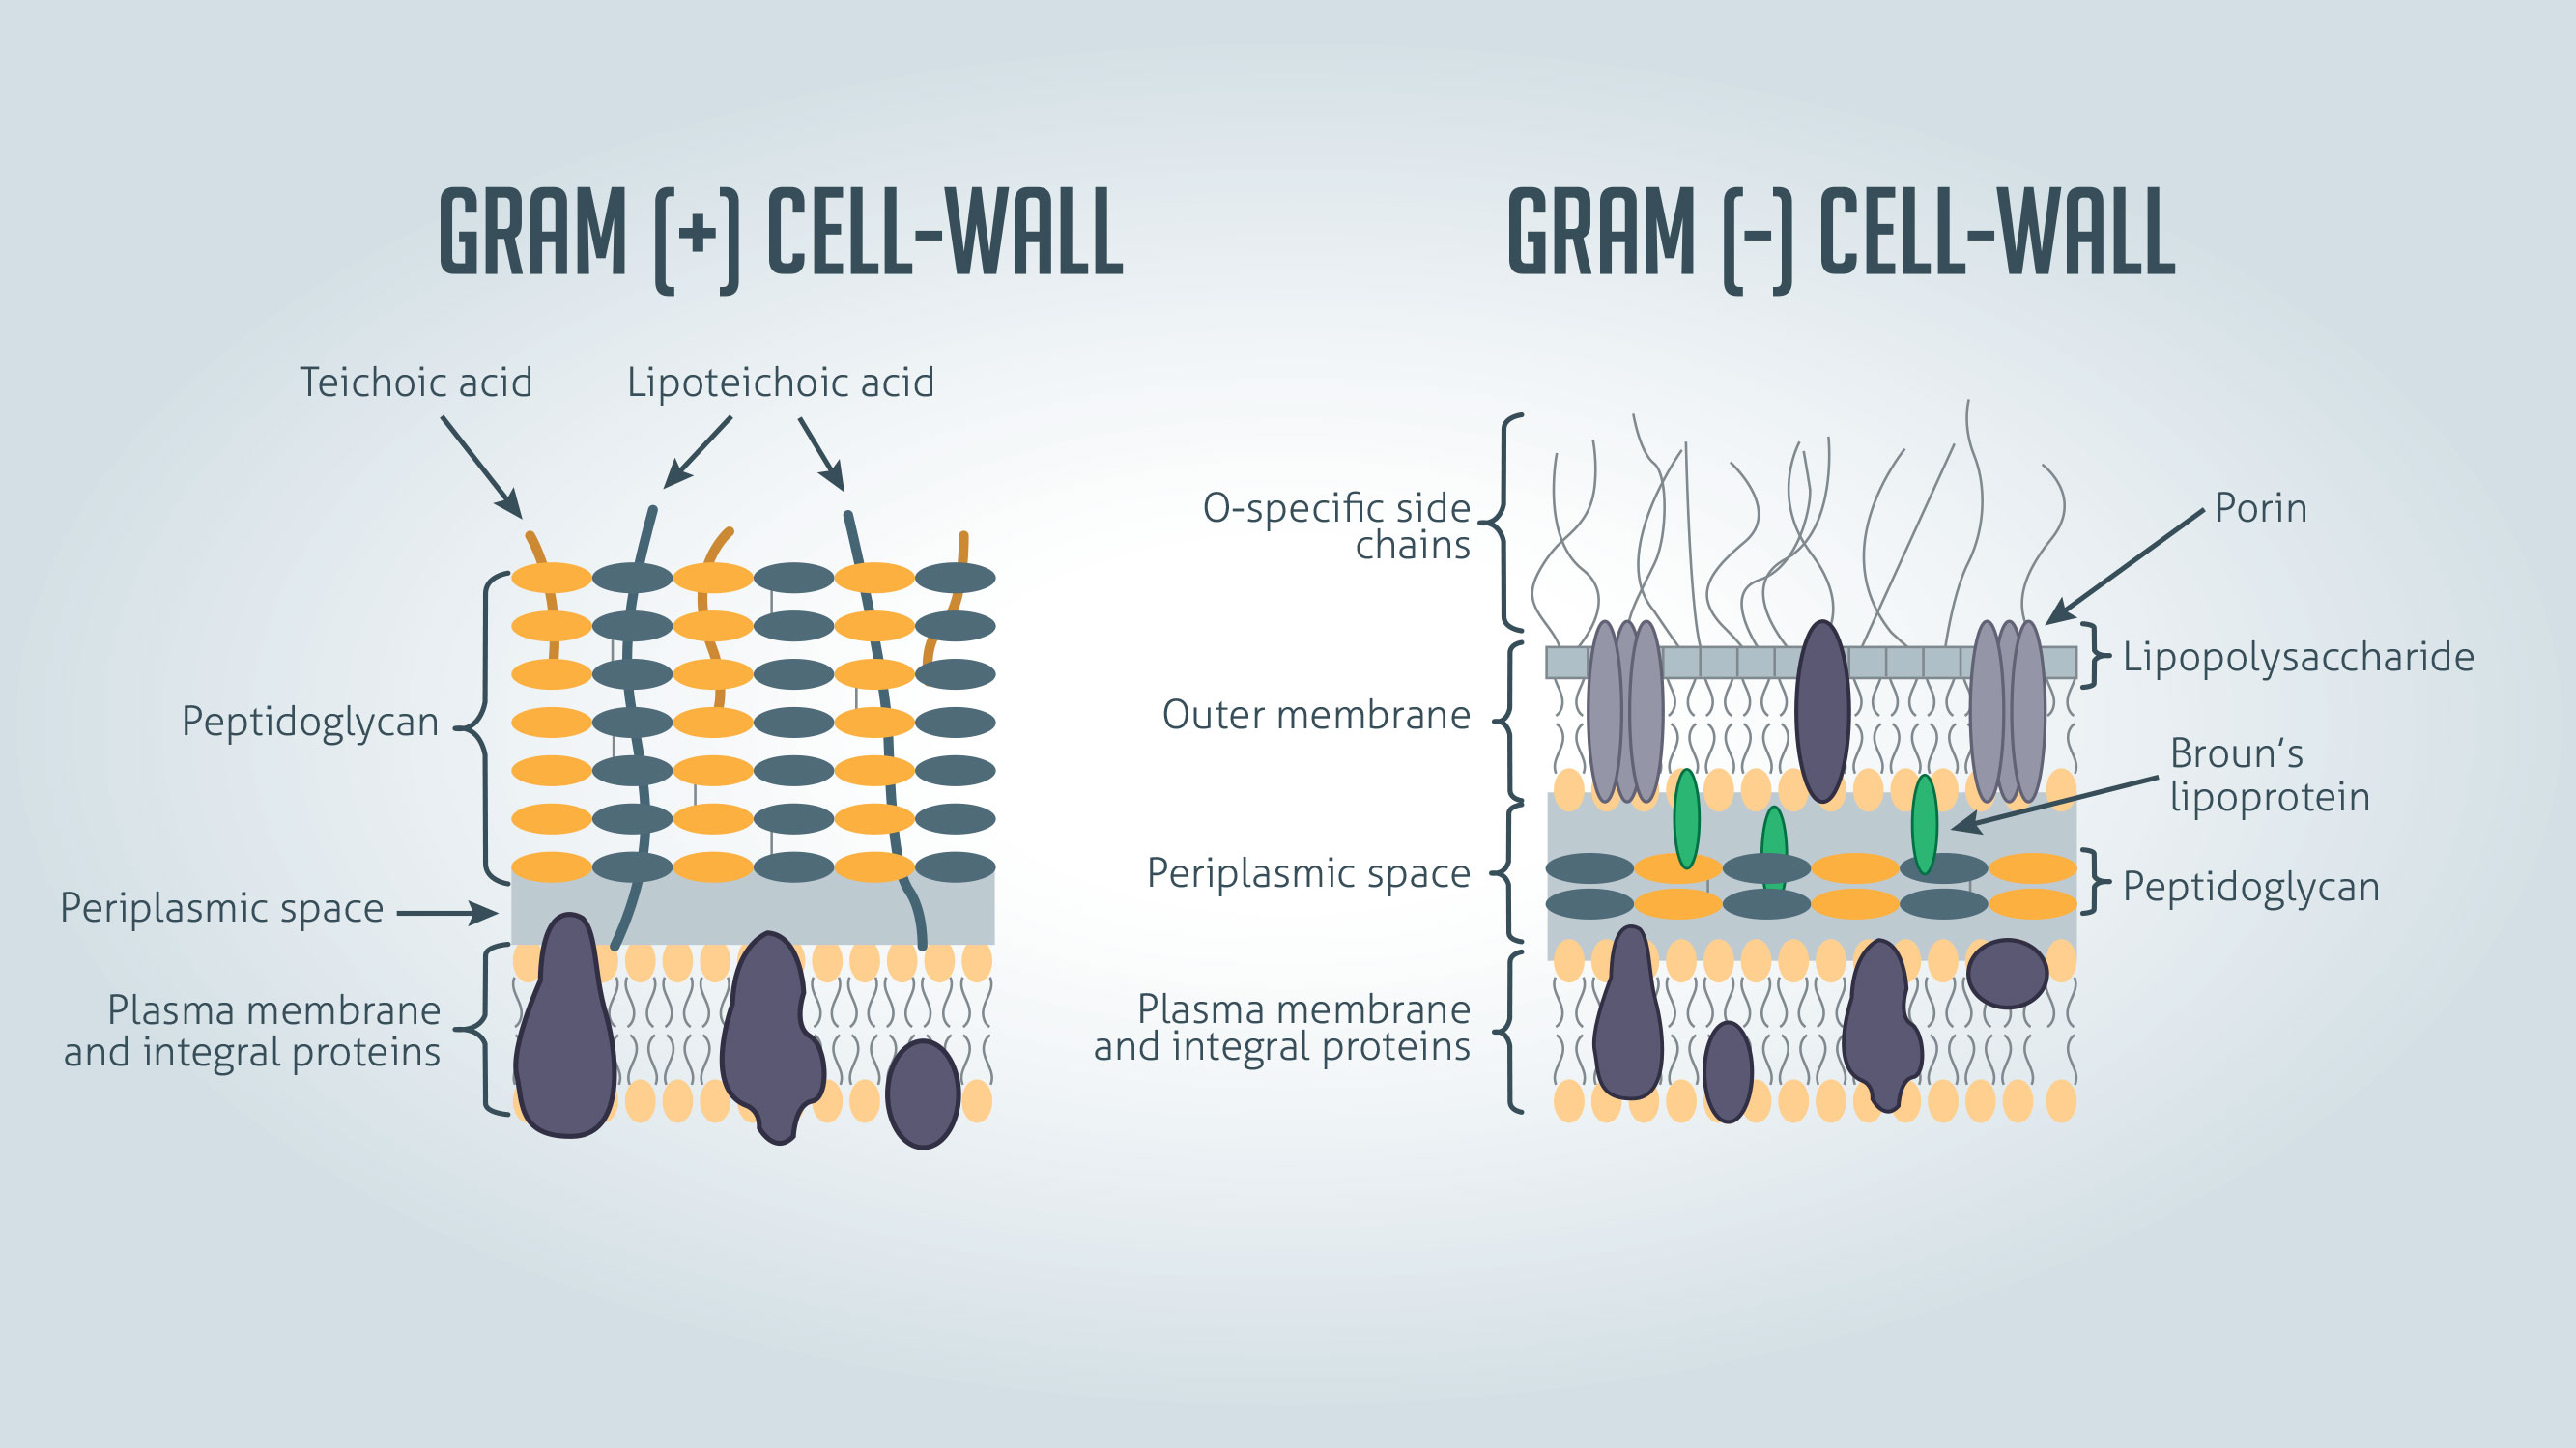 The differences in the structure of gram positive and gram negative bacteria